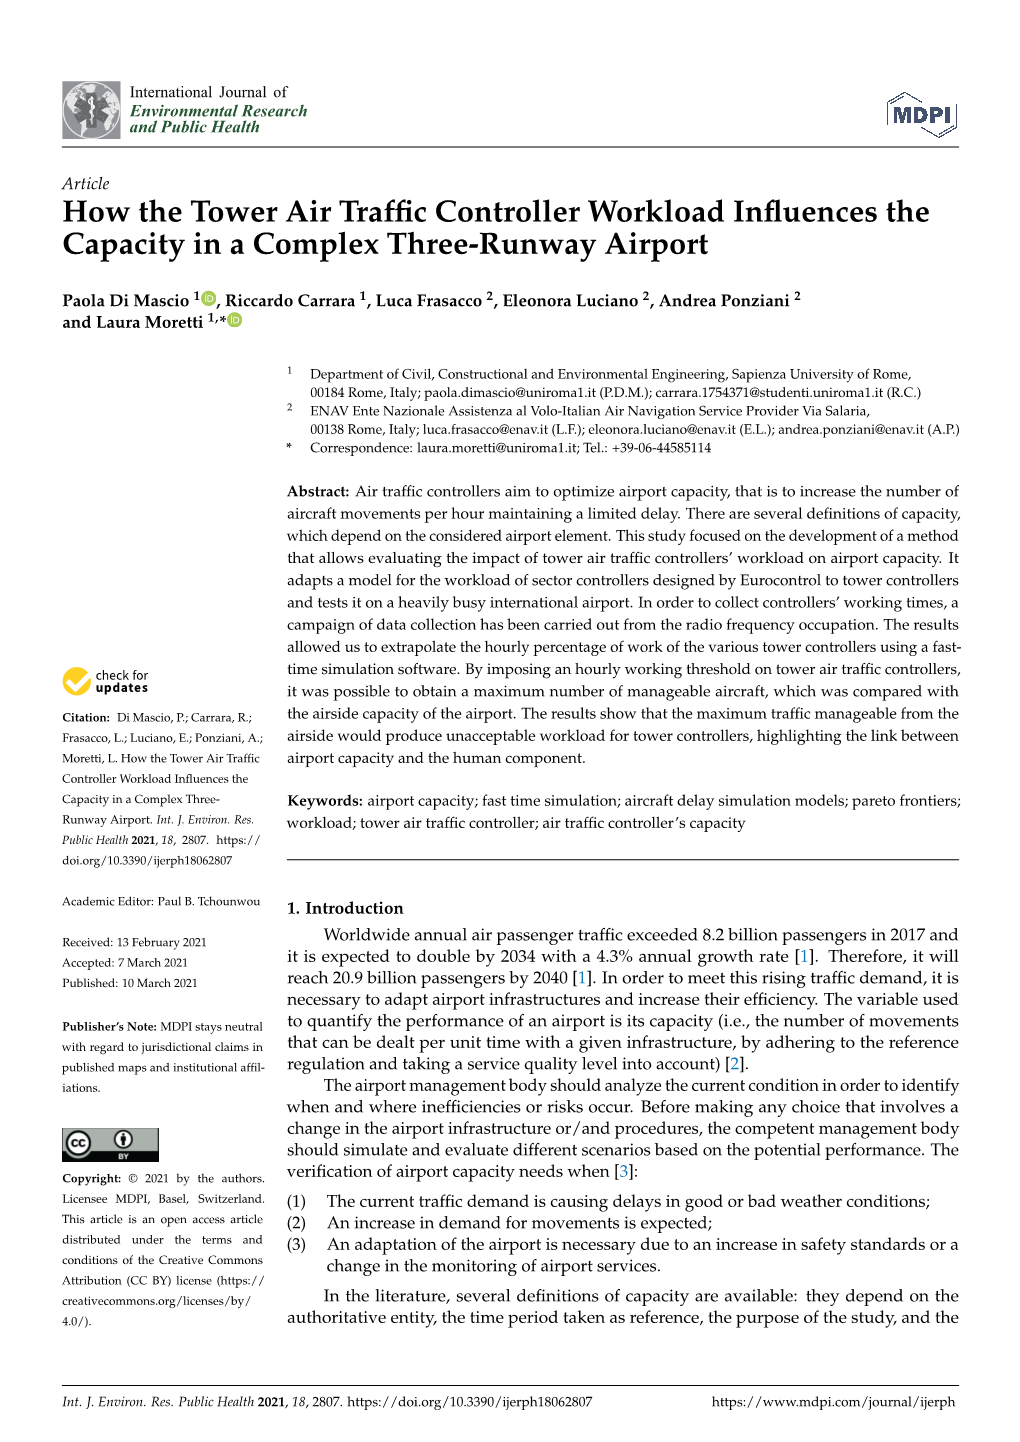 How the Tower Air Traffic Controller Workload Influences the Capacity In